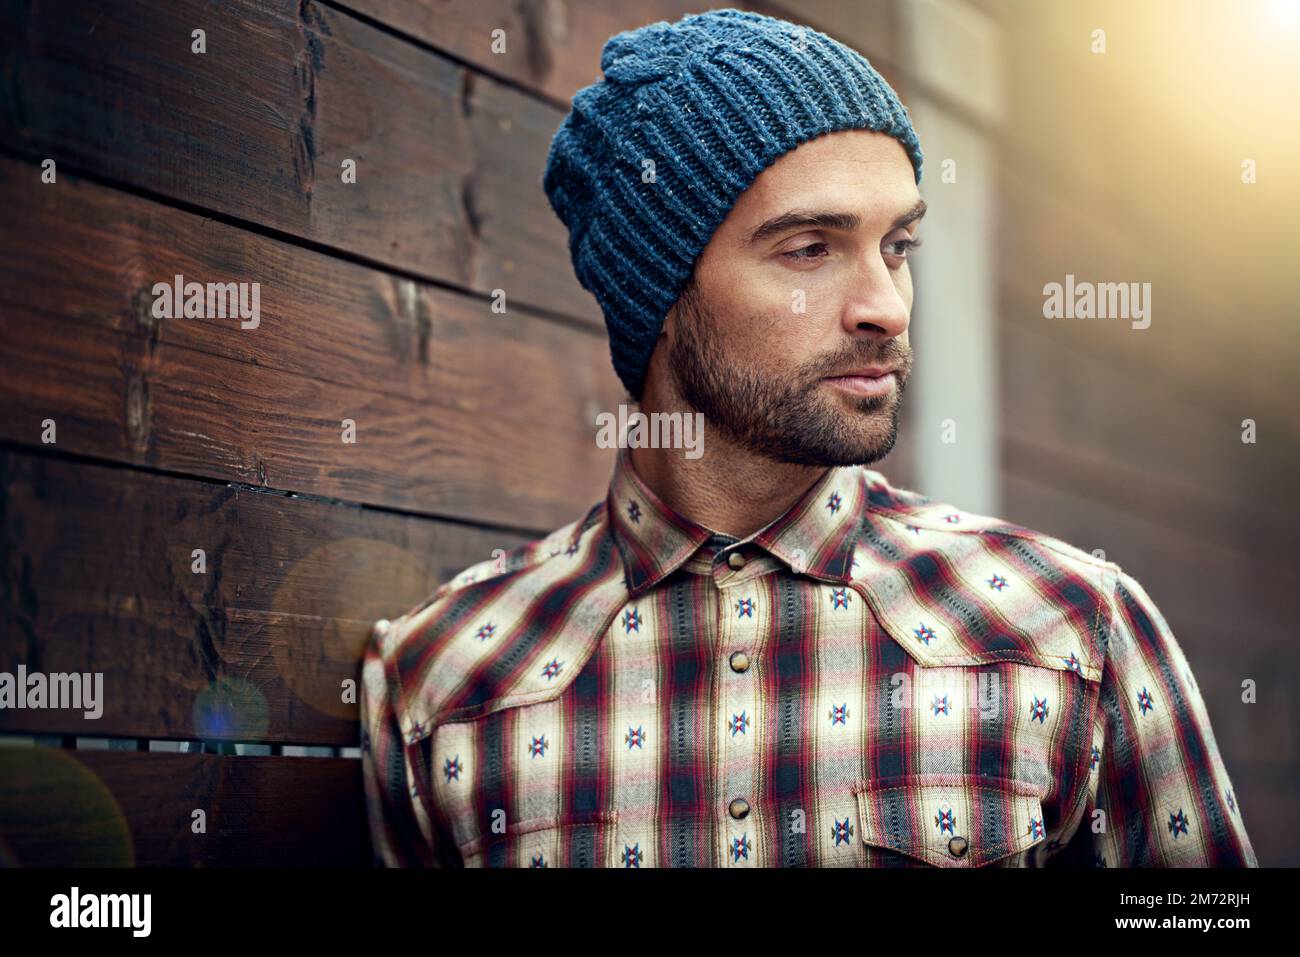 Cooler than the temperature outside. A handsome young man in winter attire. Stock Photo